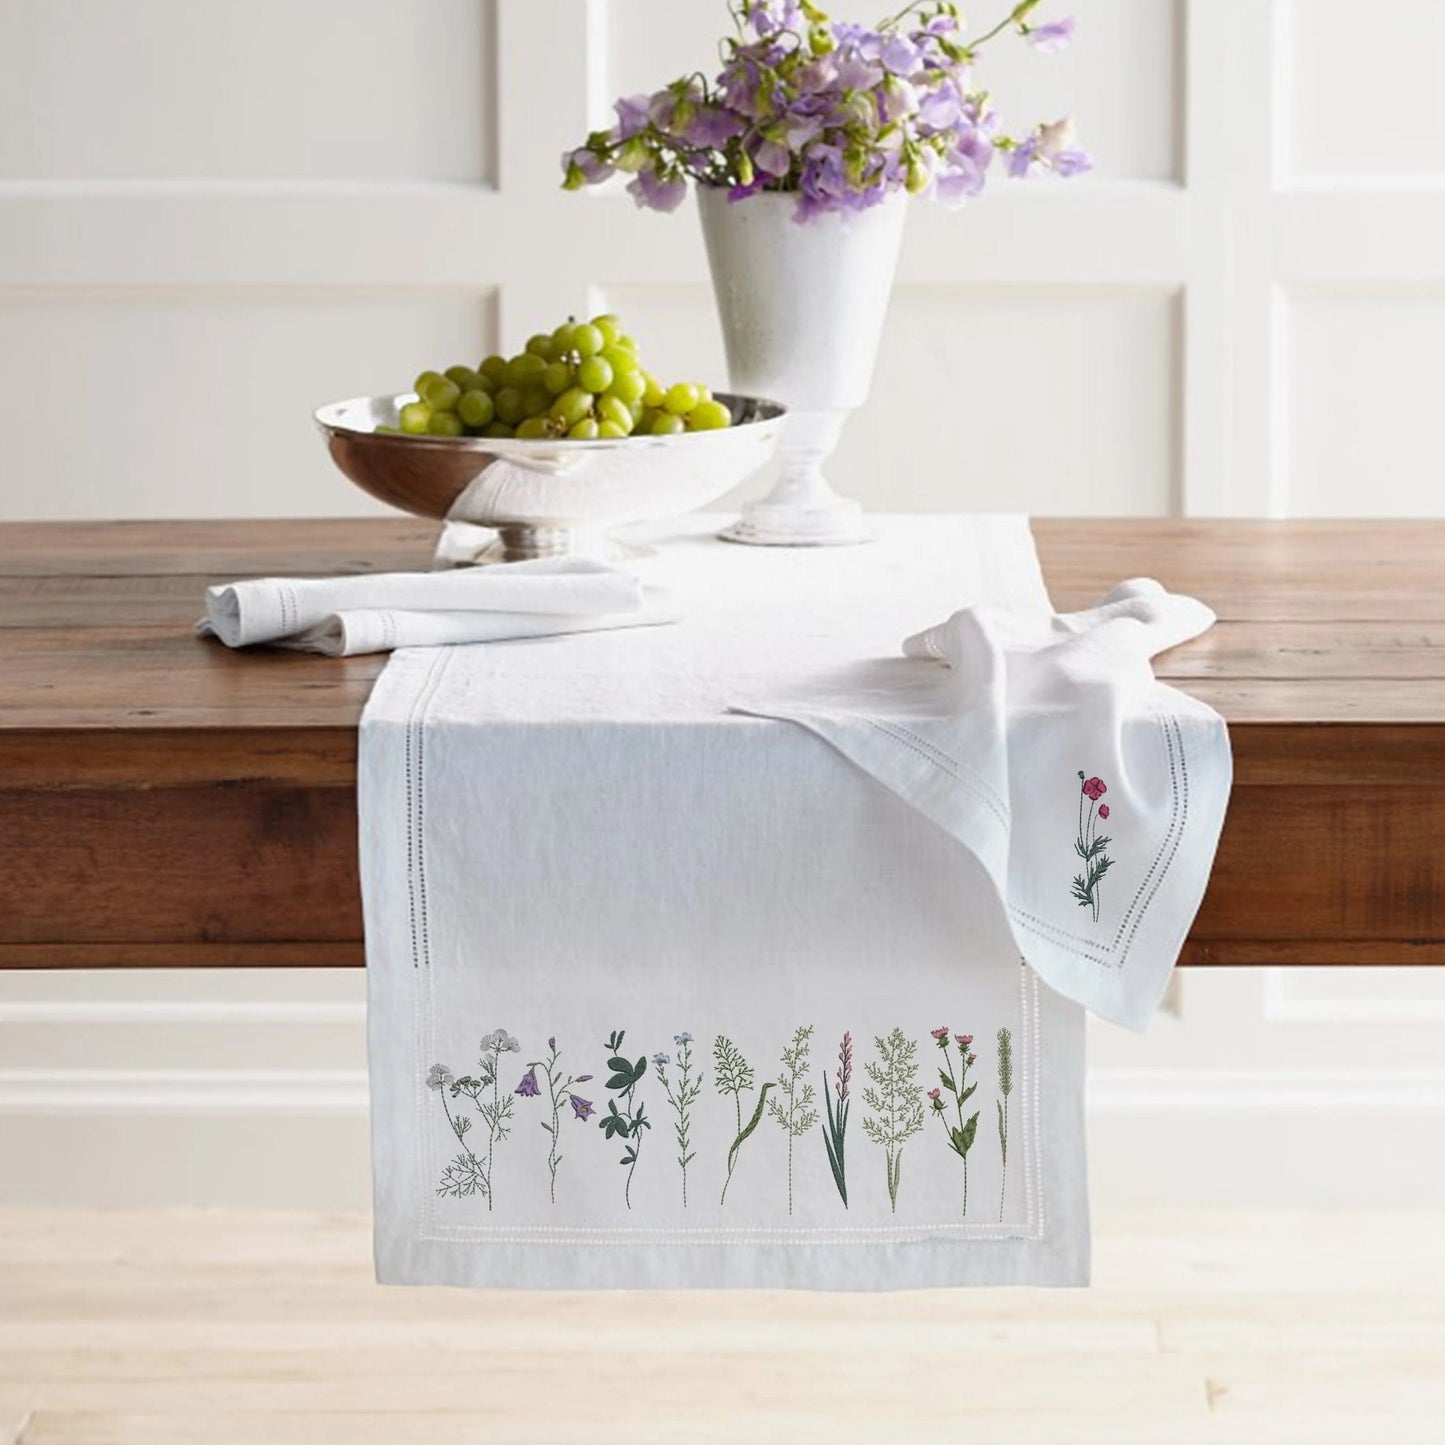 Beautiful wildflower machine embroidery design on table runner